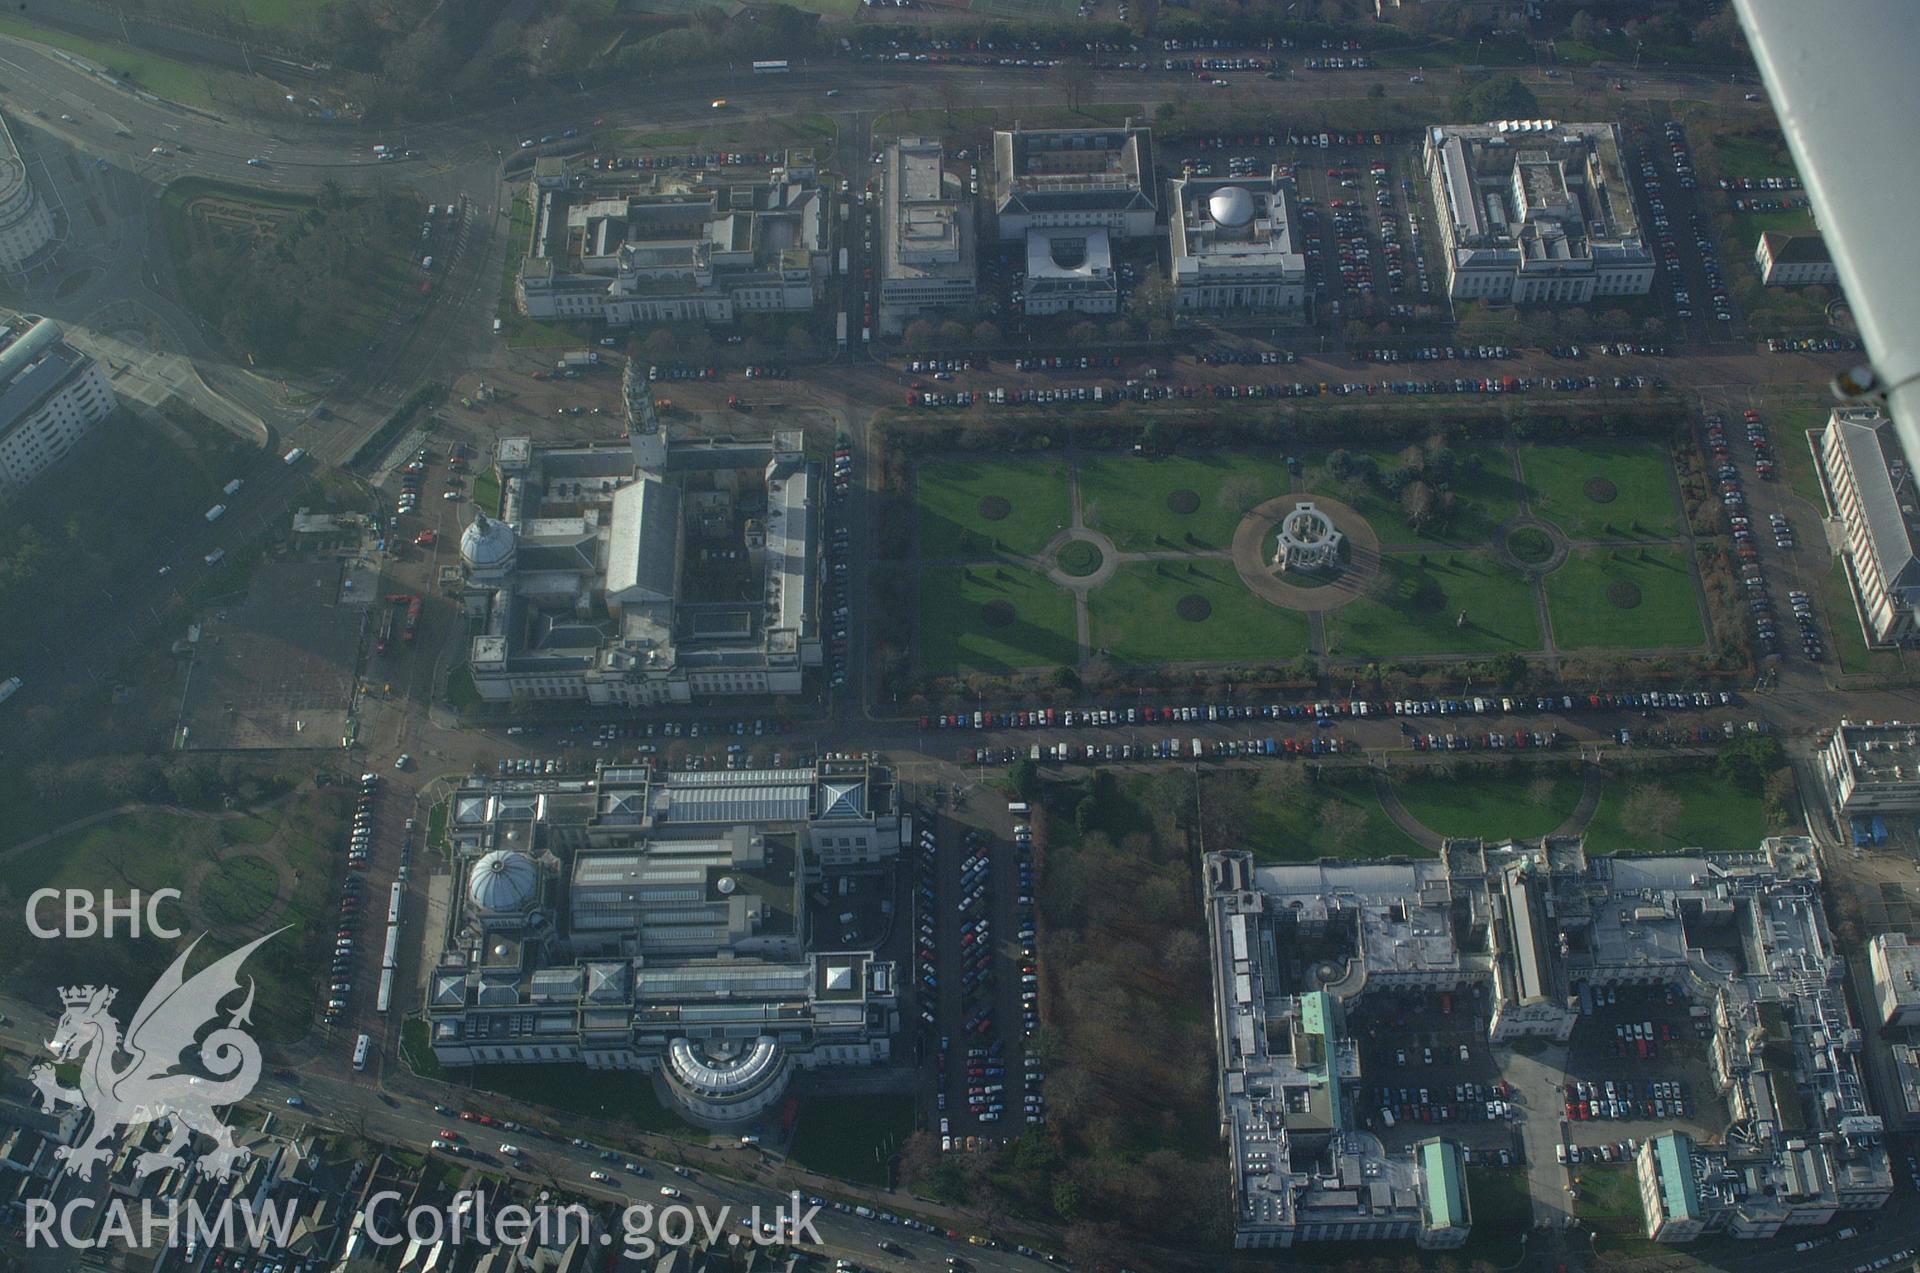 RCAHMW colour oblique aerial photograph of Cathays Park, Cardiff taken on 13/01/2005 by Toby Driver